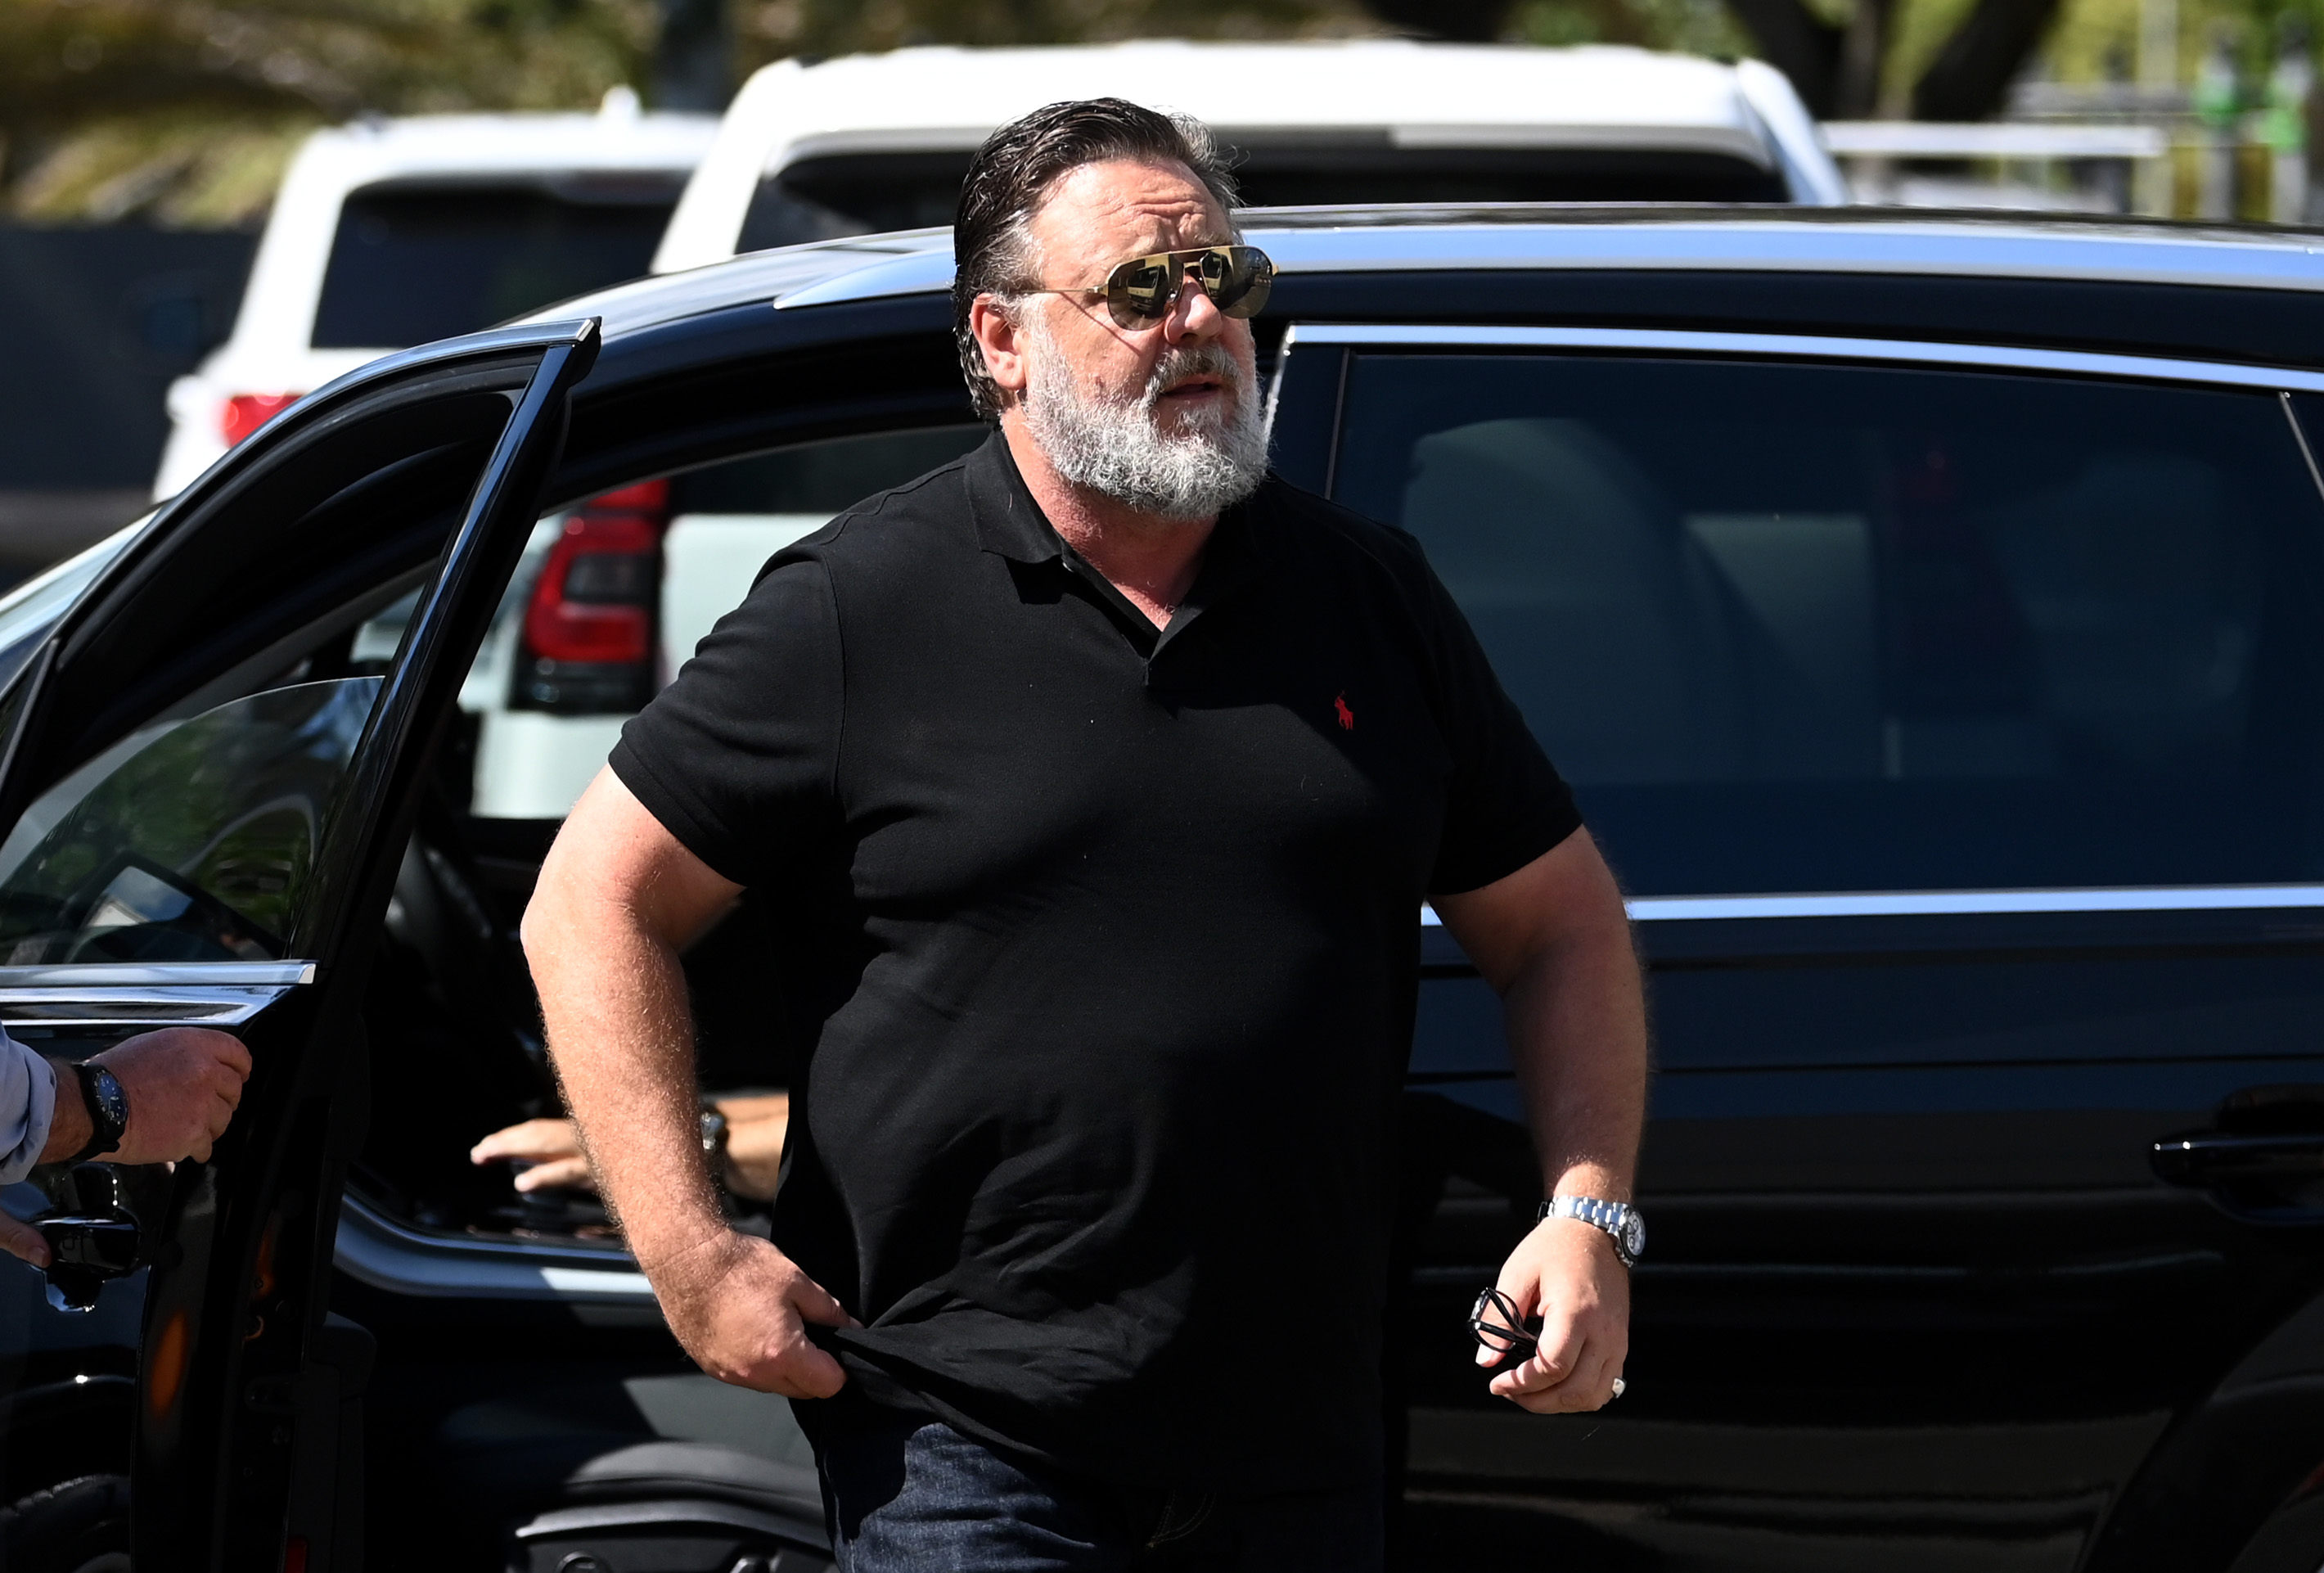 Russell Crowe am 28. Januar 2023 in Burleigh Heads, Australien | Quelle: Getty Images